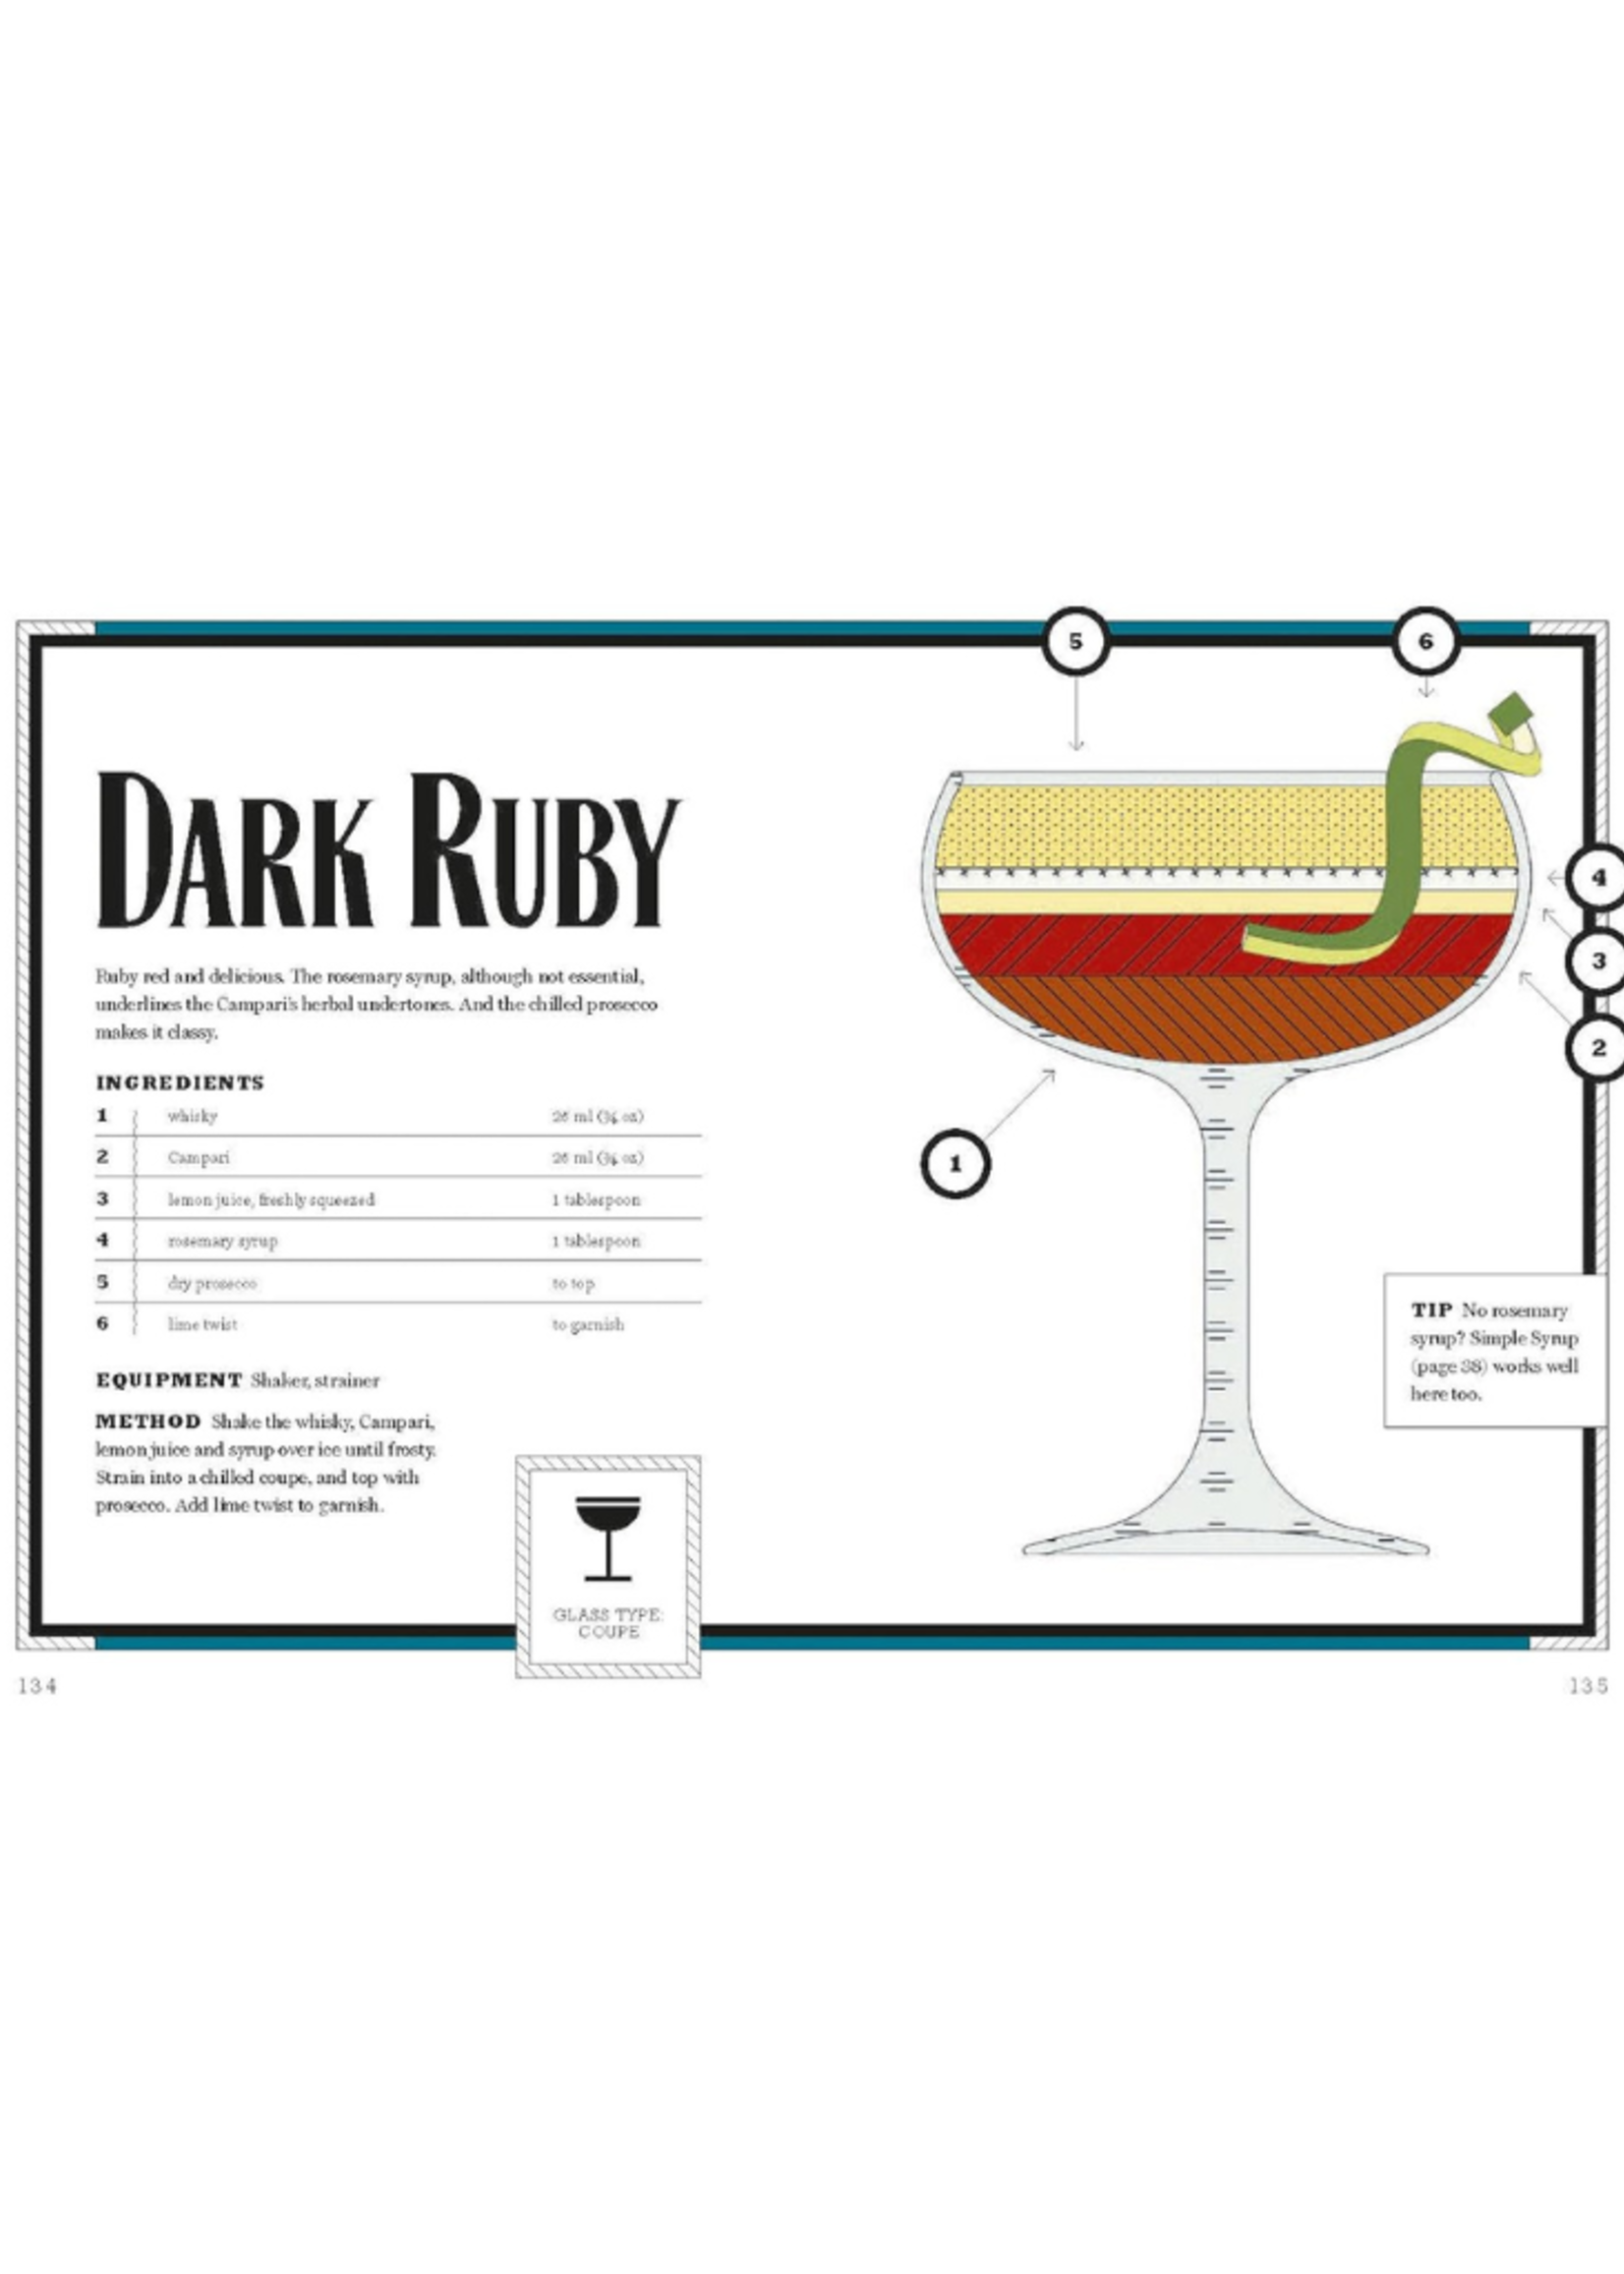 Chronicle Books Whiskey: Shake, Muddle, Stir: Over 40 of the Best Cocktails for Whiskey Lovers by Dan Jones